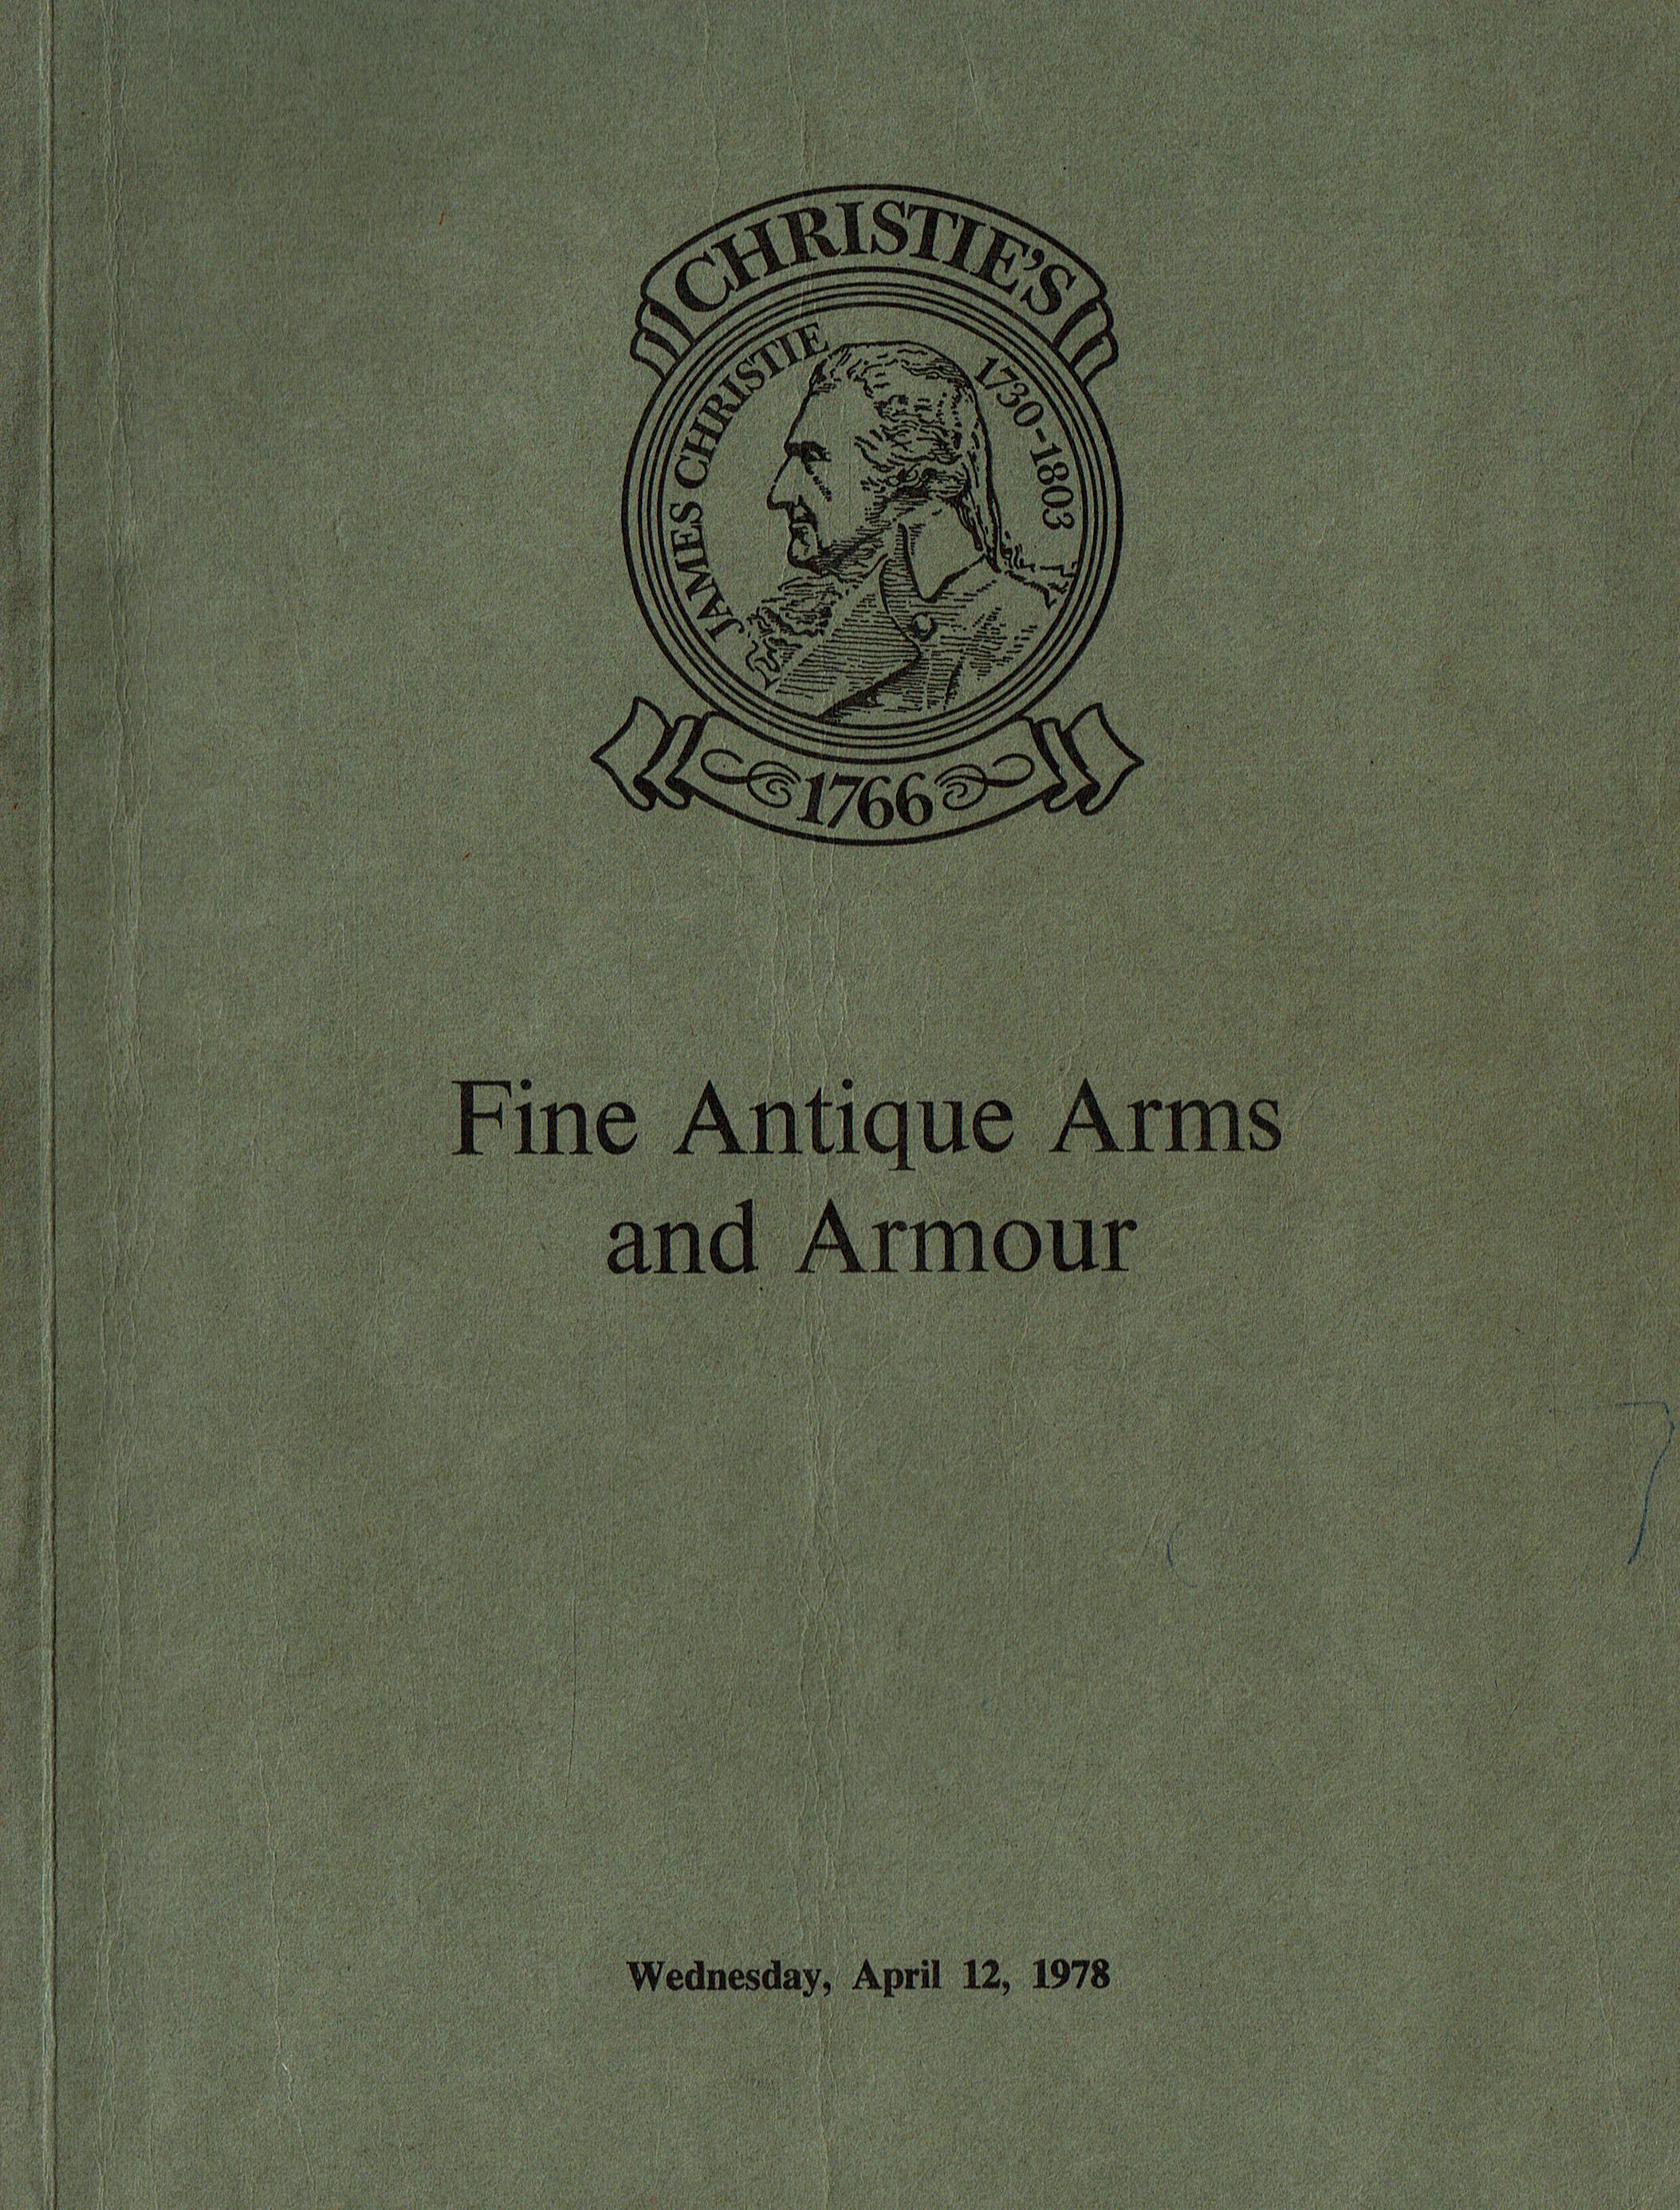 Christies 1978 Fine Antique Arms and Armour